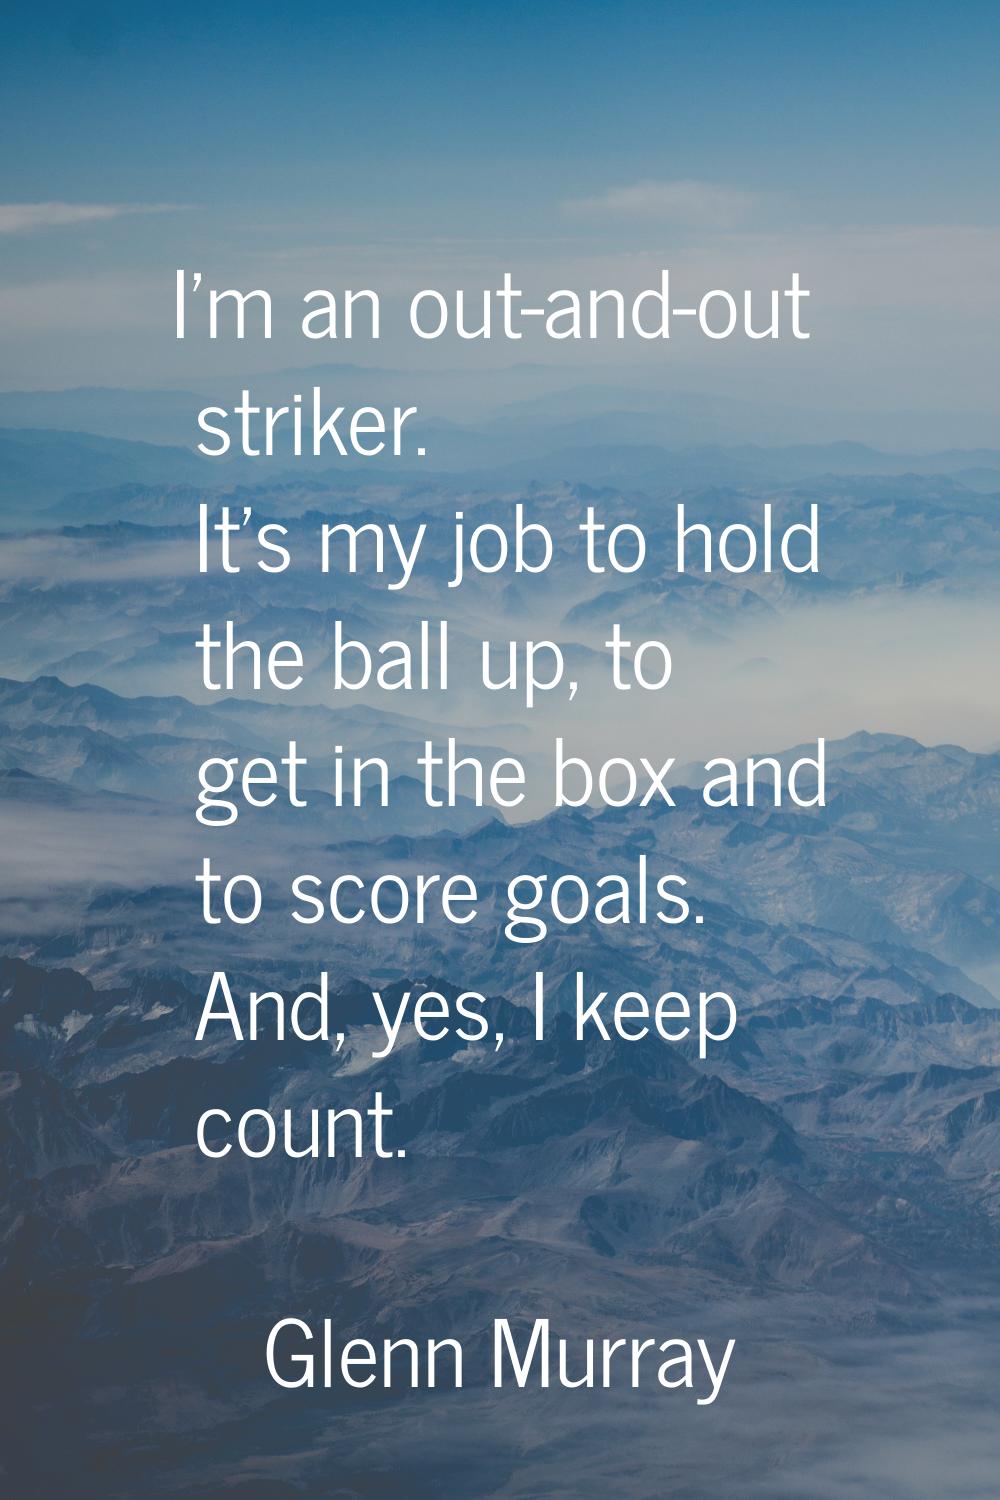 I'm an out-and-out striker. It's my job to hold the ball up, to get in the box and to score goals. 